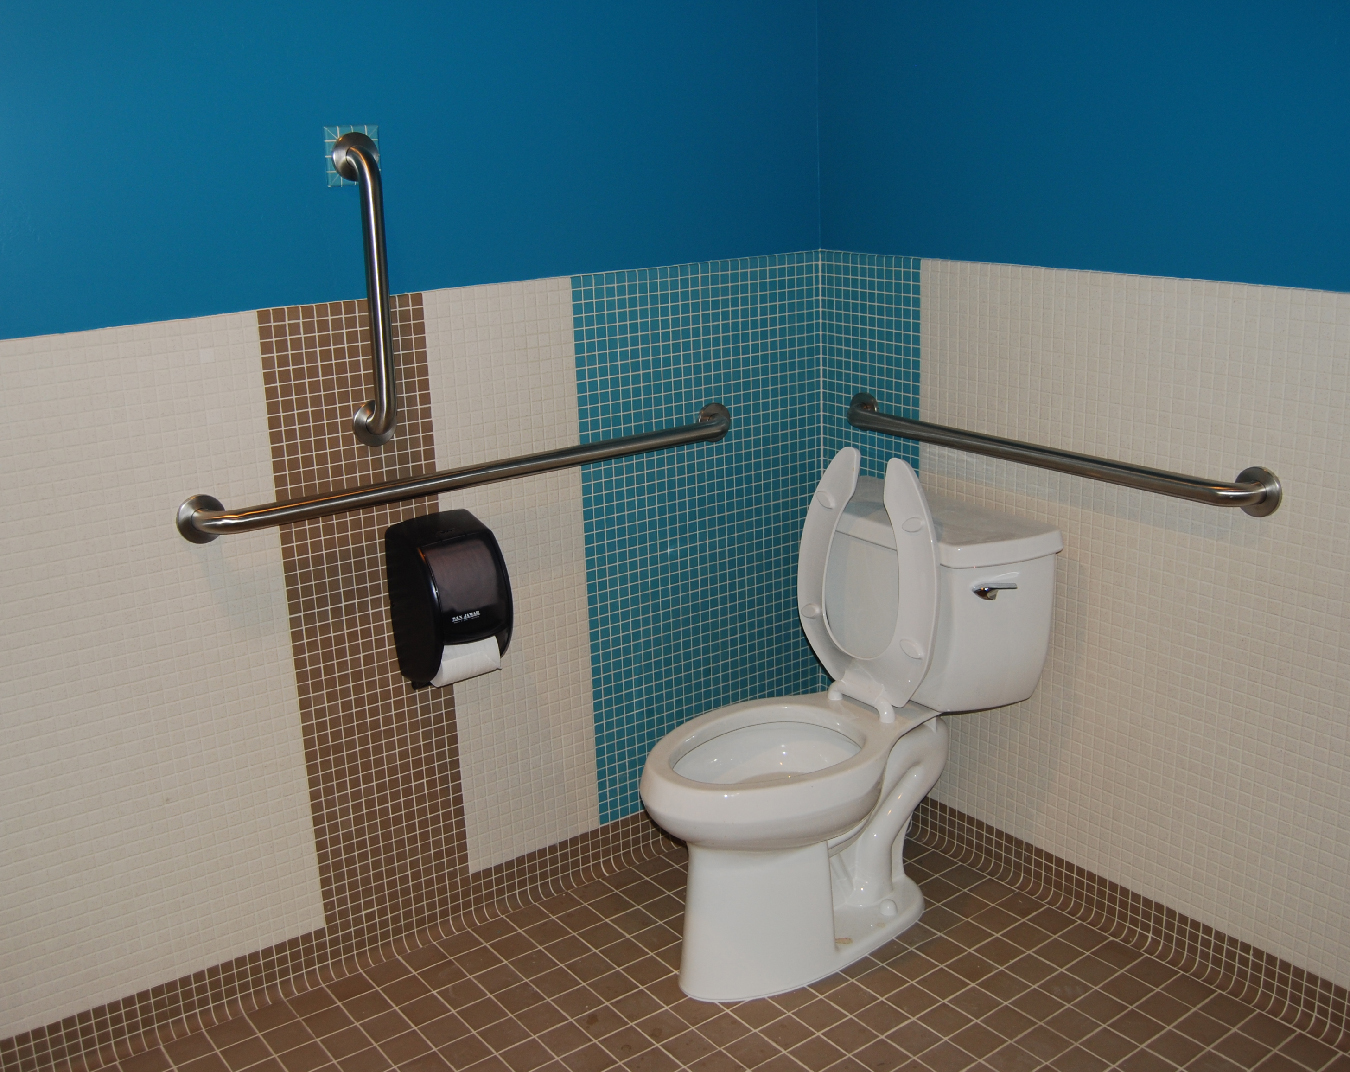 Small commercial space, is one bathroom enough?